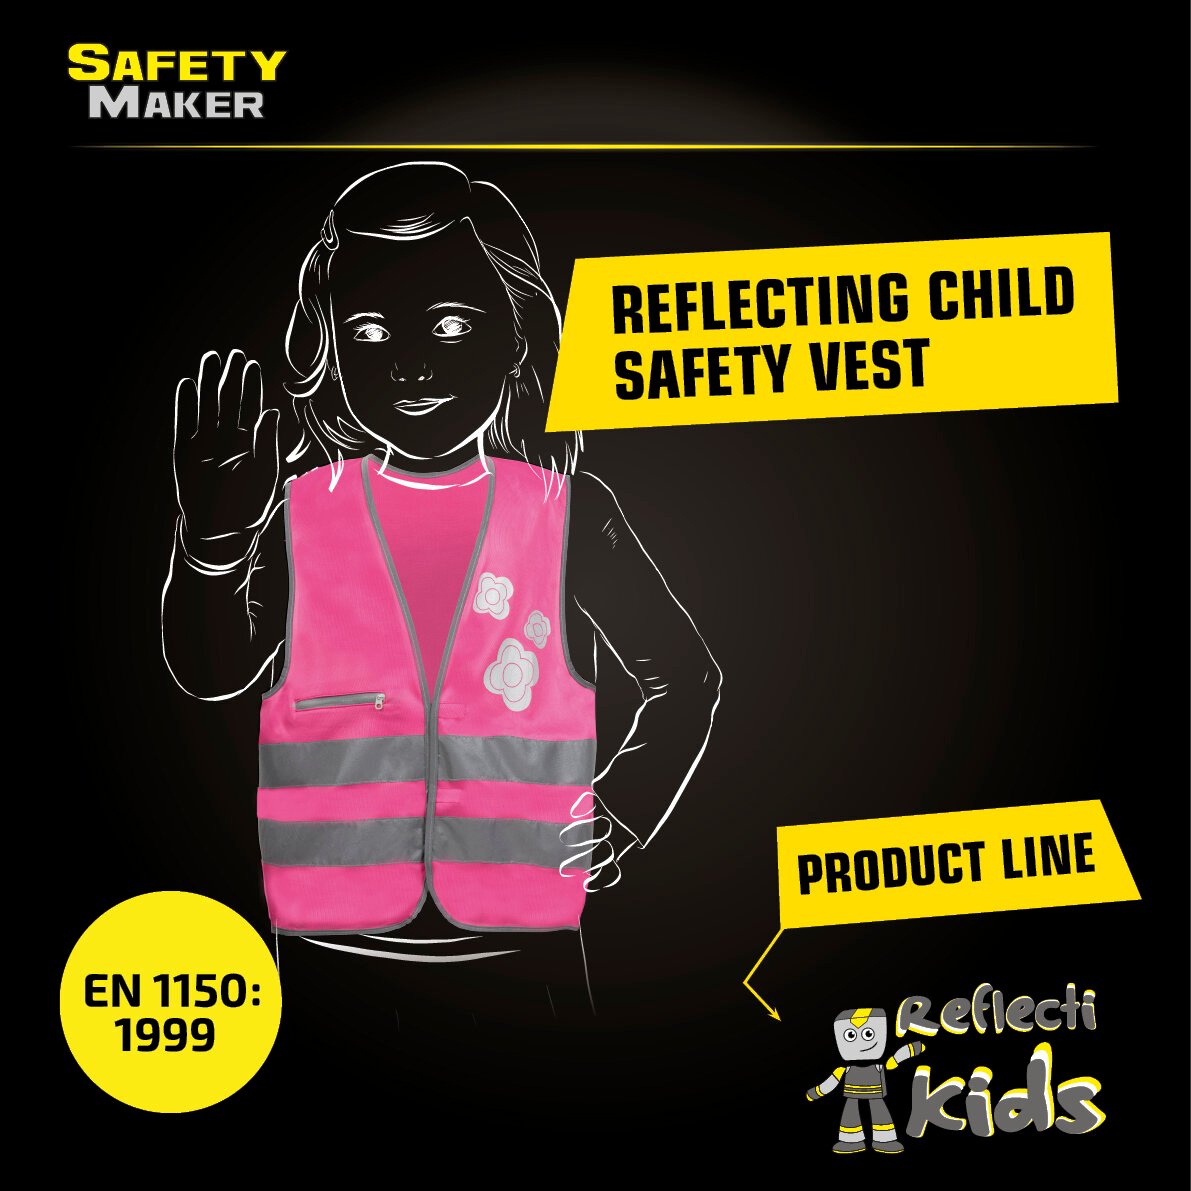 safety vest 3-6 years Ballet Doll